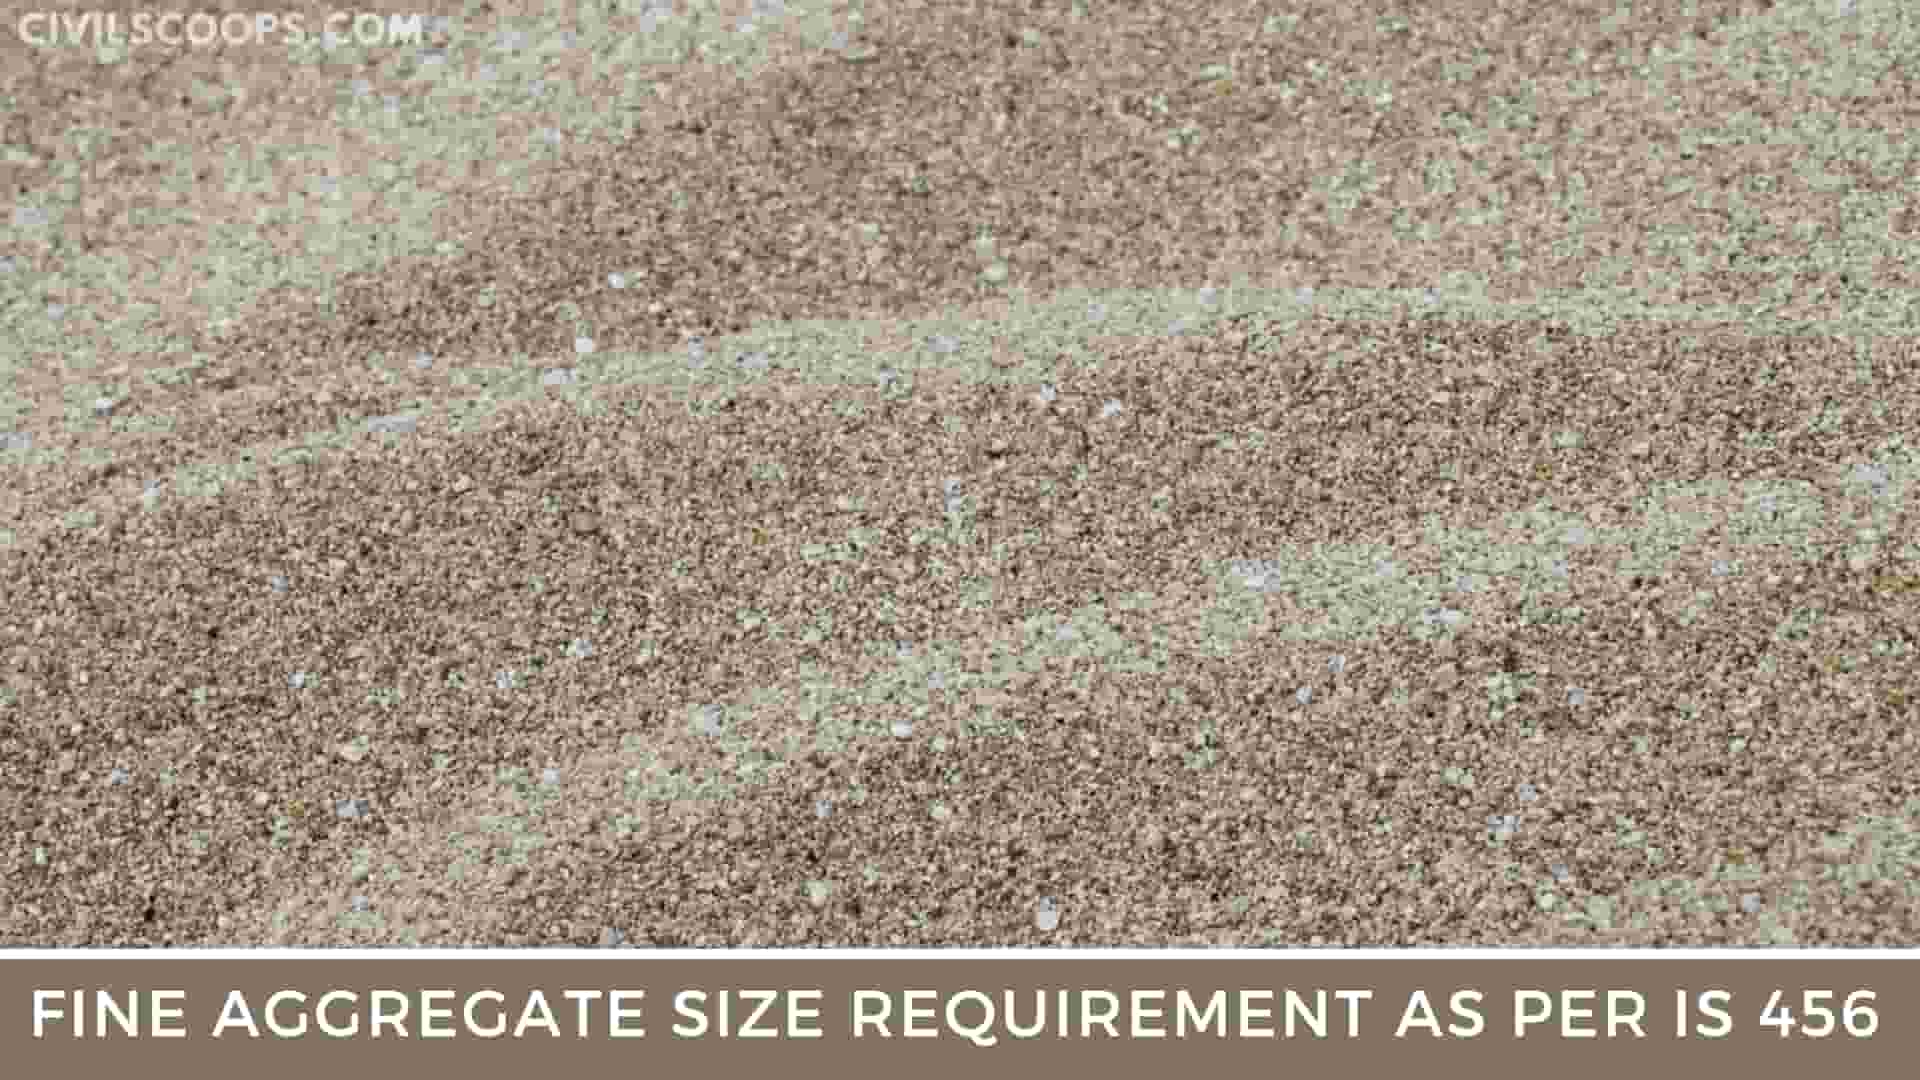 Fine Aggregate Size Requirement As Per IS 456